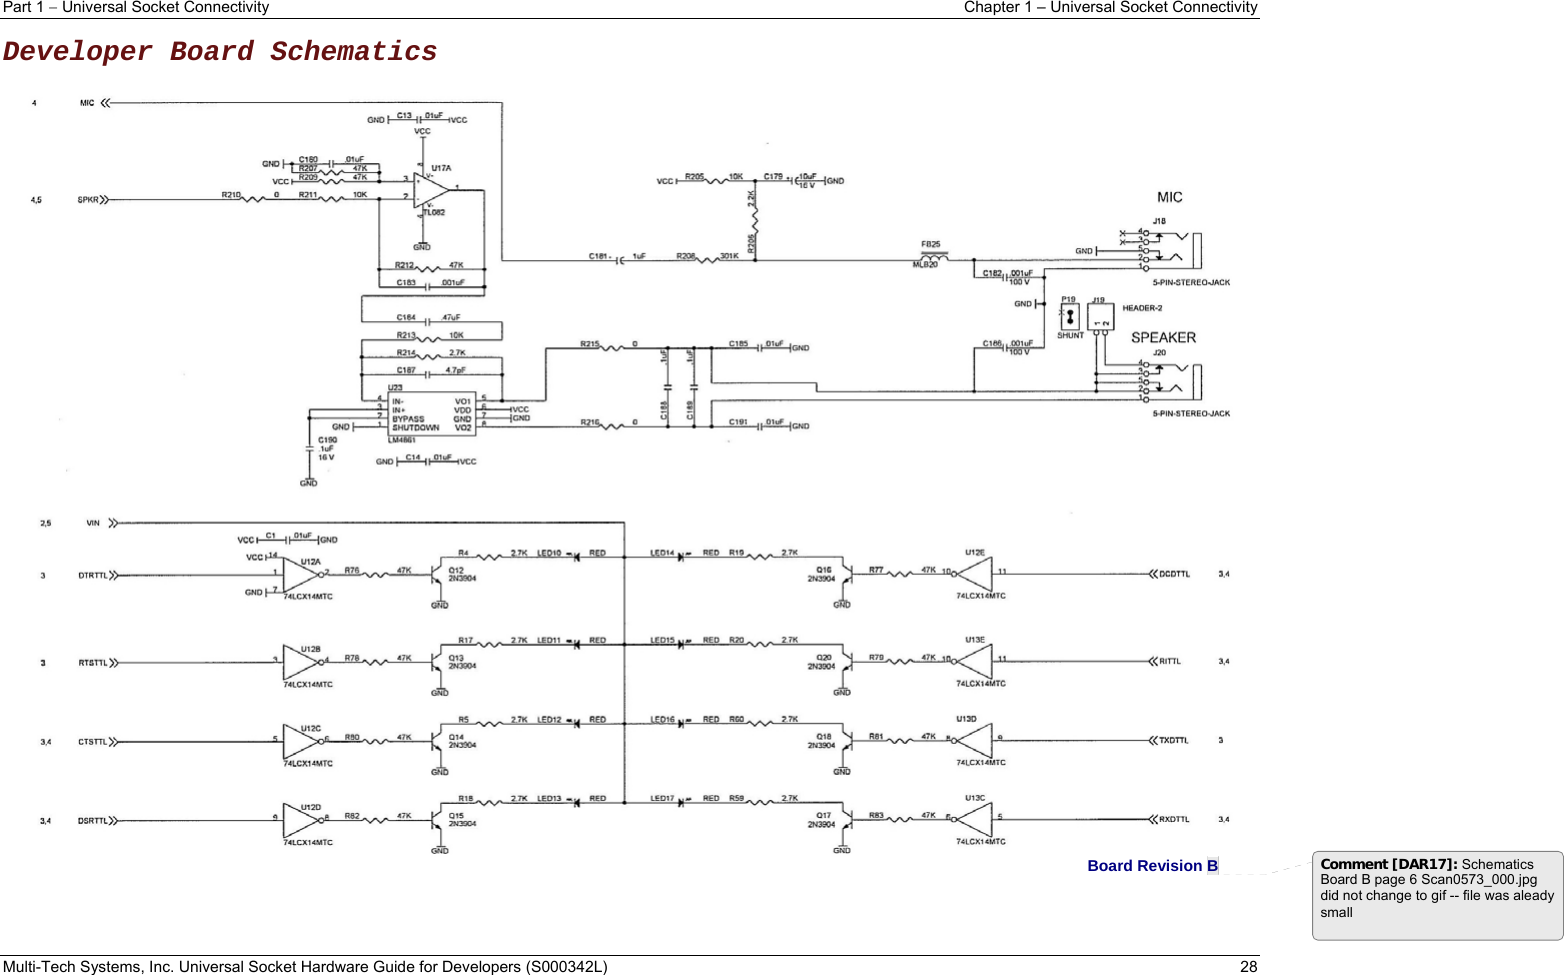 Part 1  Universal Socket Connectivity  Chapter 1 – Universal Socket Connectivity Multi-Tech Systems, Inc. Universal Socket Hardware Guide for Developers (S000342L)  28  Developer Board Schematics   Board Revision B   Comment [DAR17]: Schematics Board B page 6 Scan0573_000.jpg did not change to gif -- file was aleady small  